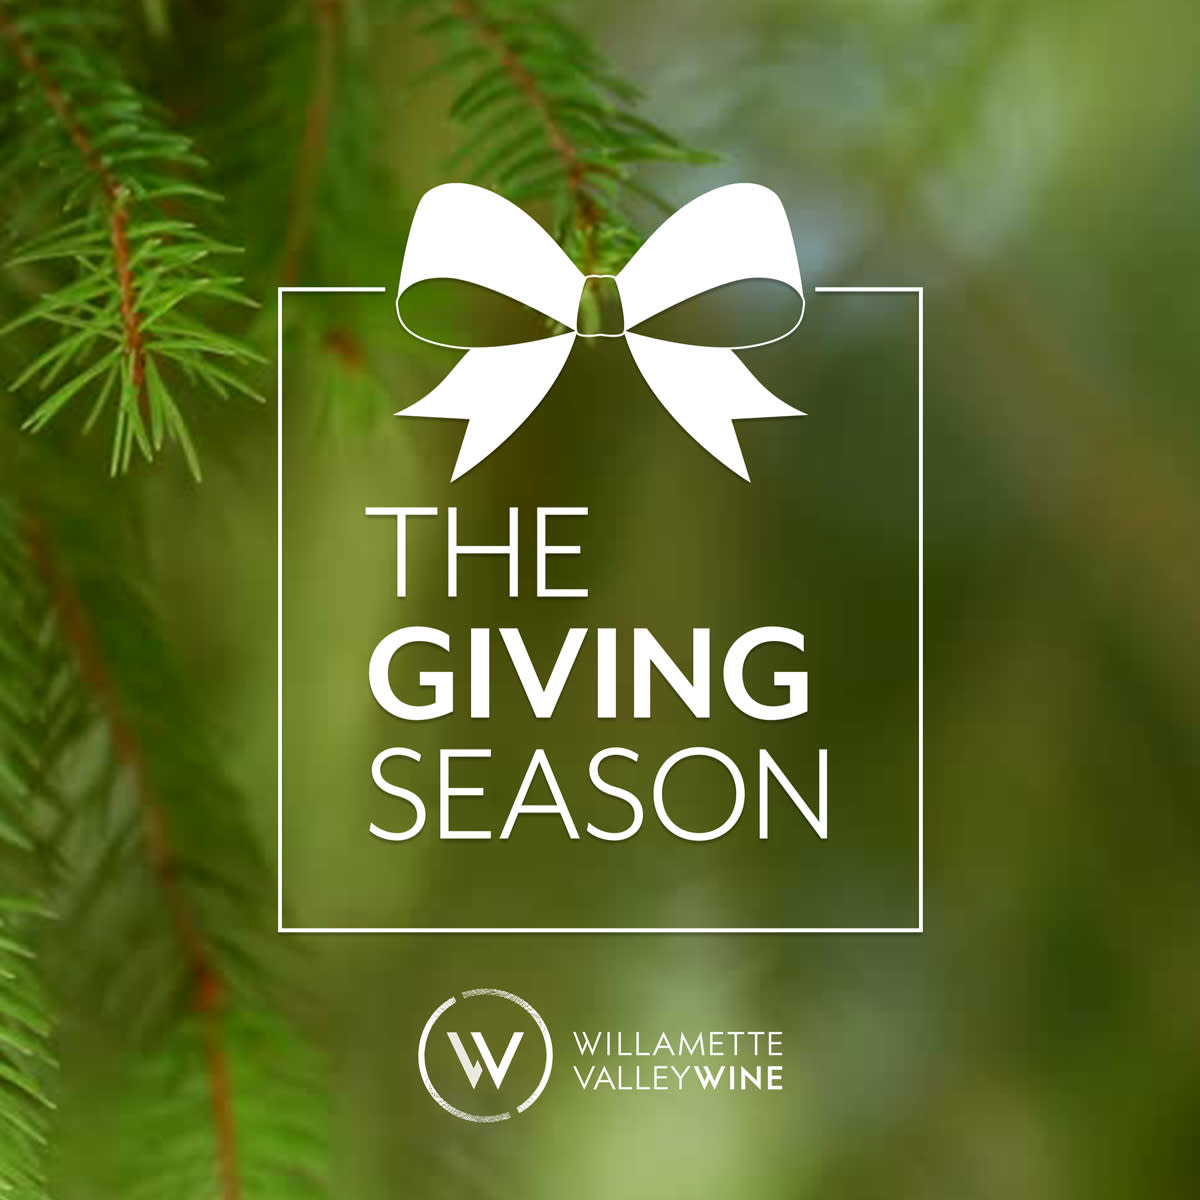 "The Giving Season" text with evergreen tree background